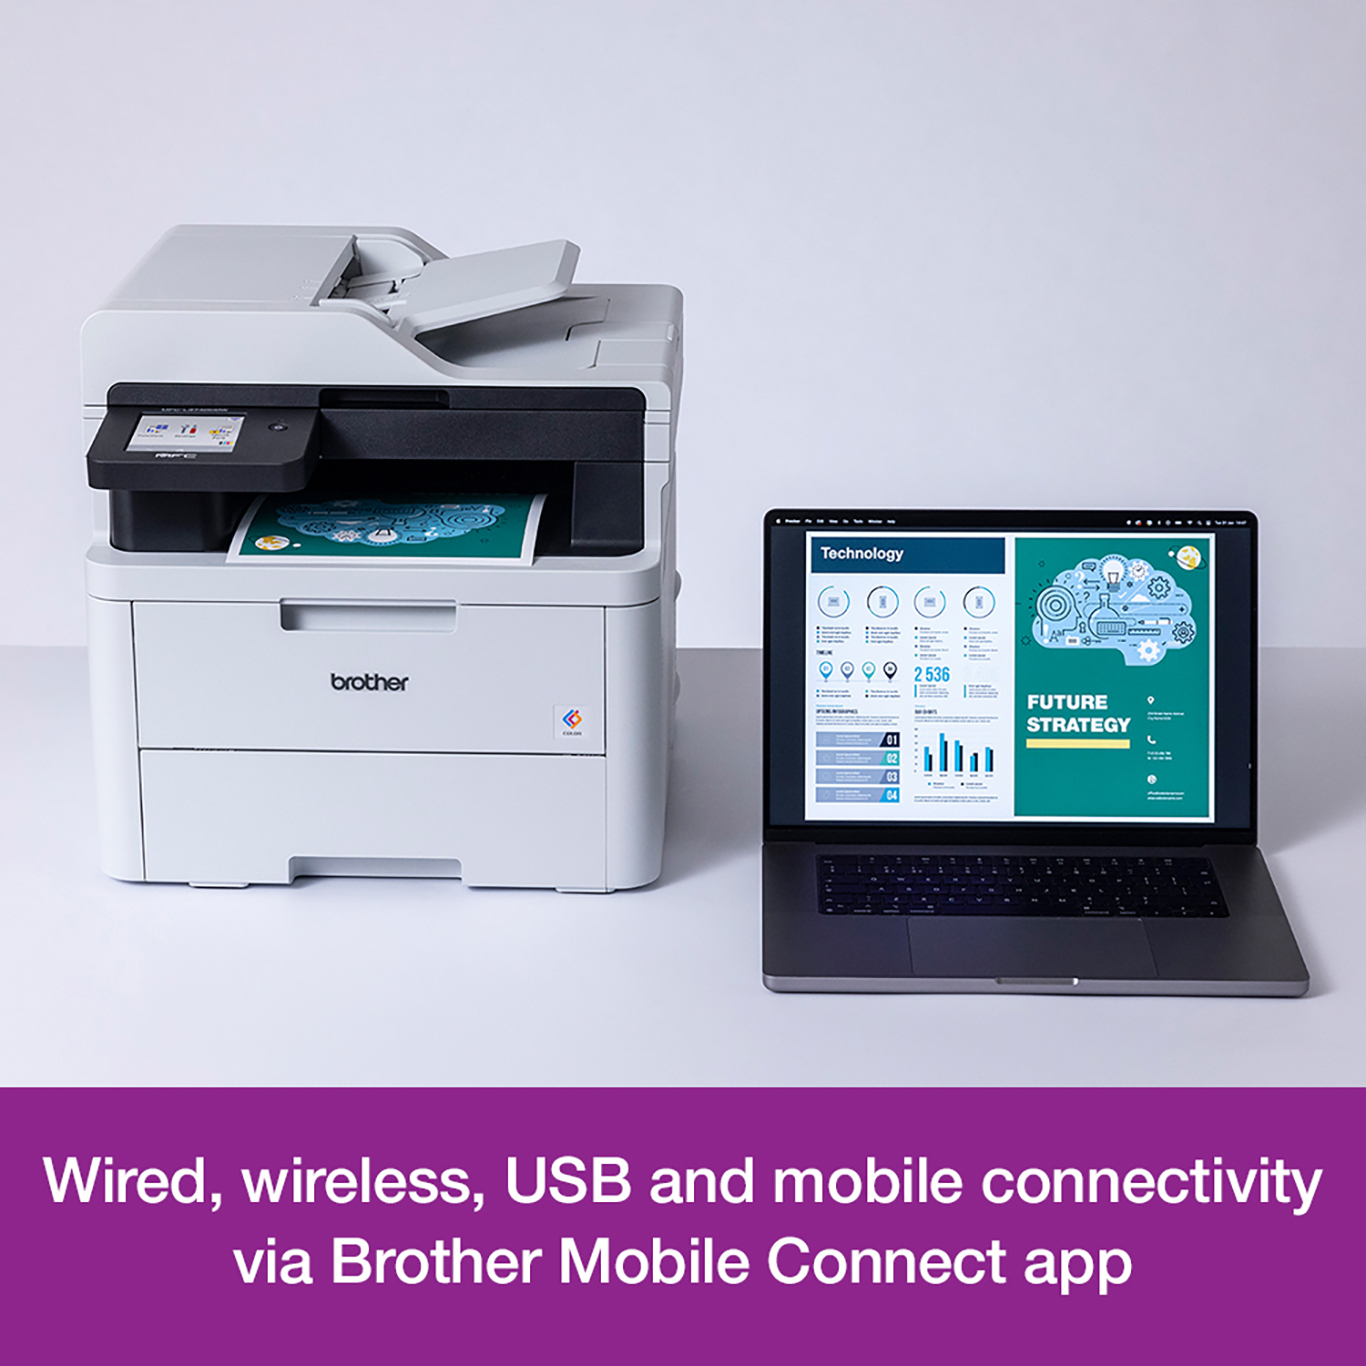 Brother MFC-L3740CDW A4 Colour Multifunction LED Laser Printer